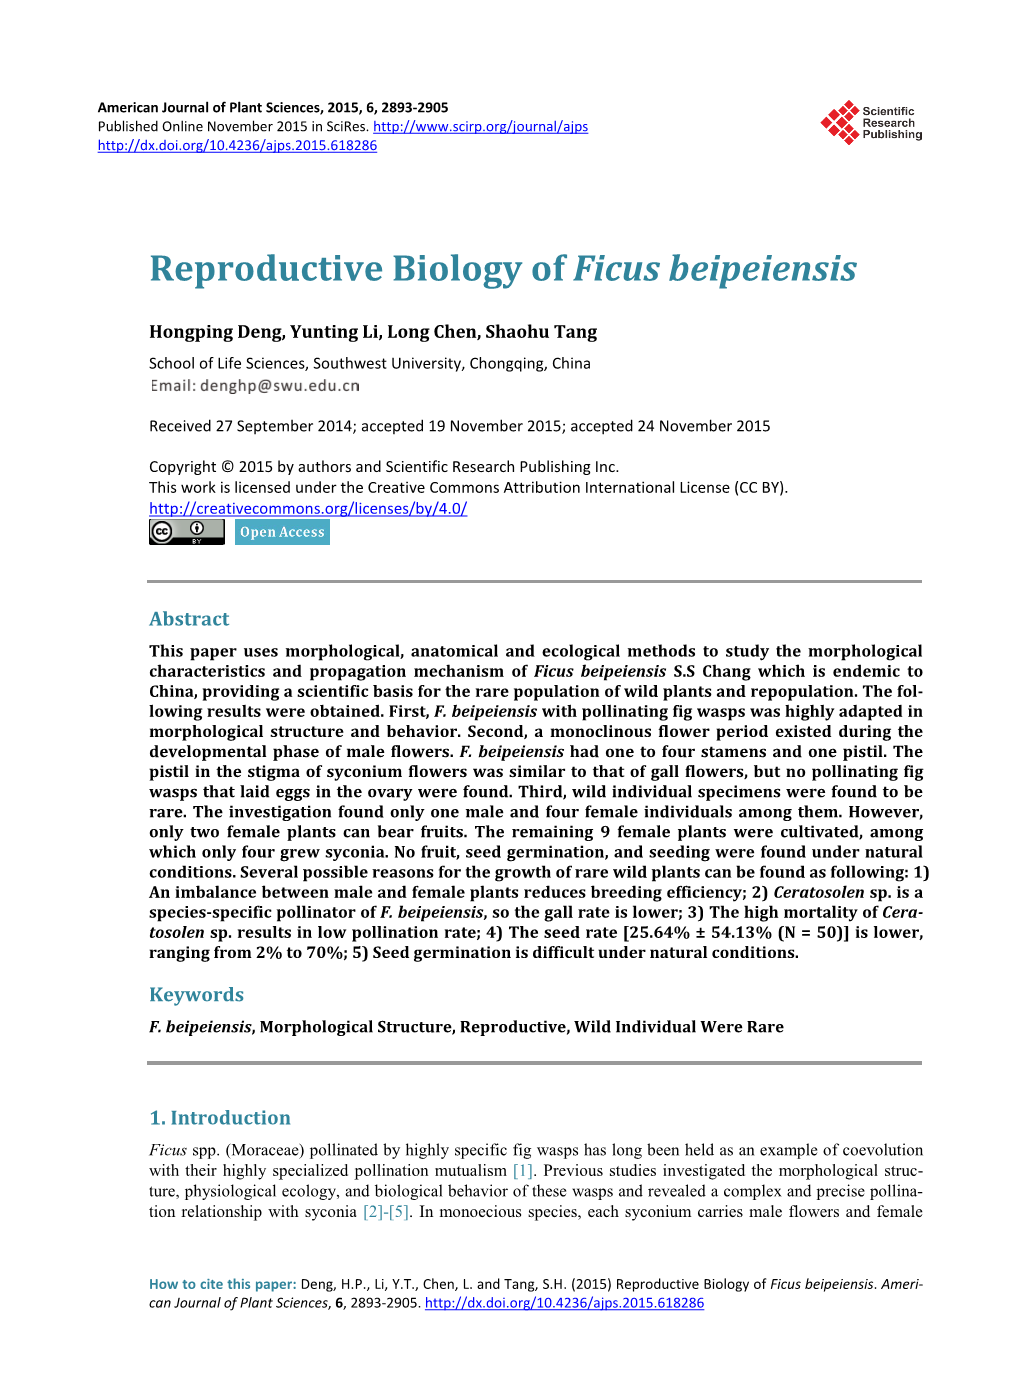 Reproductive Biology of Ficus Beipeiensis